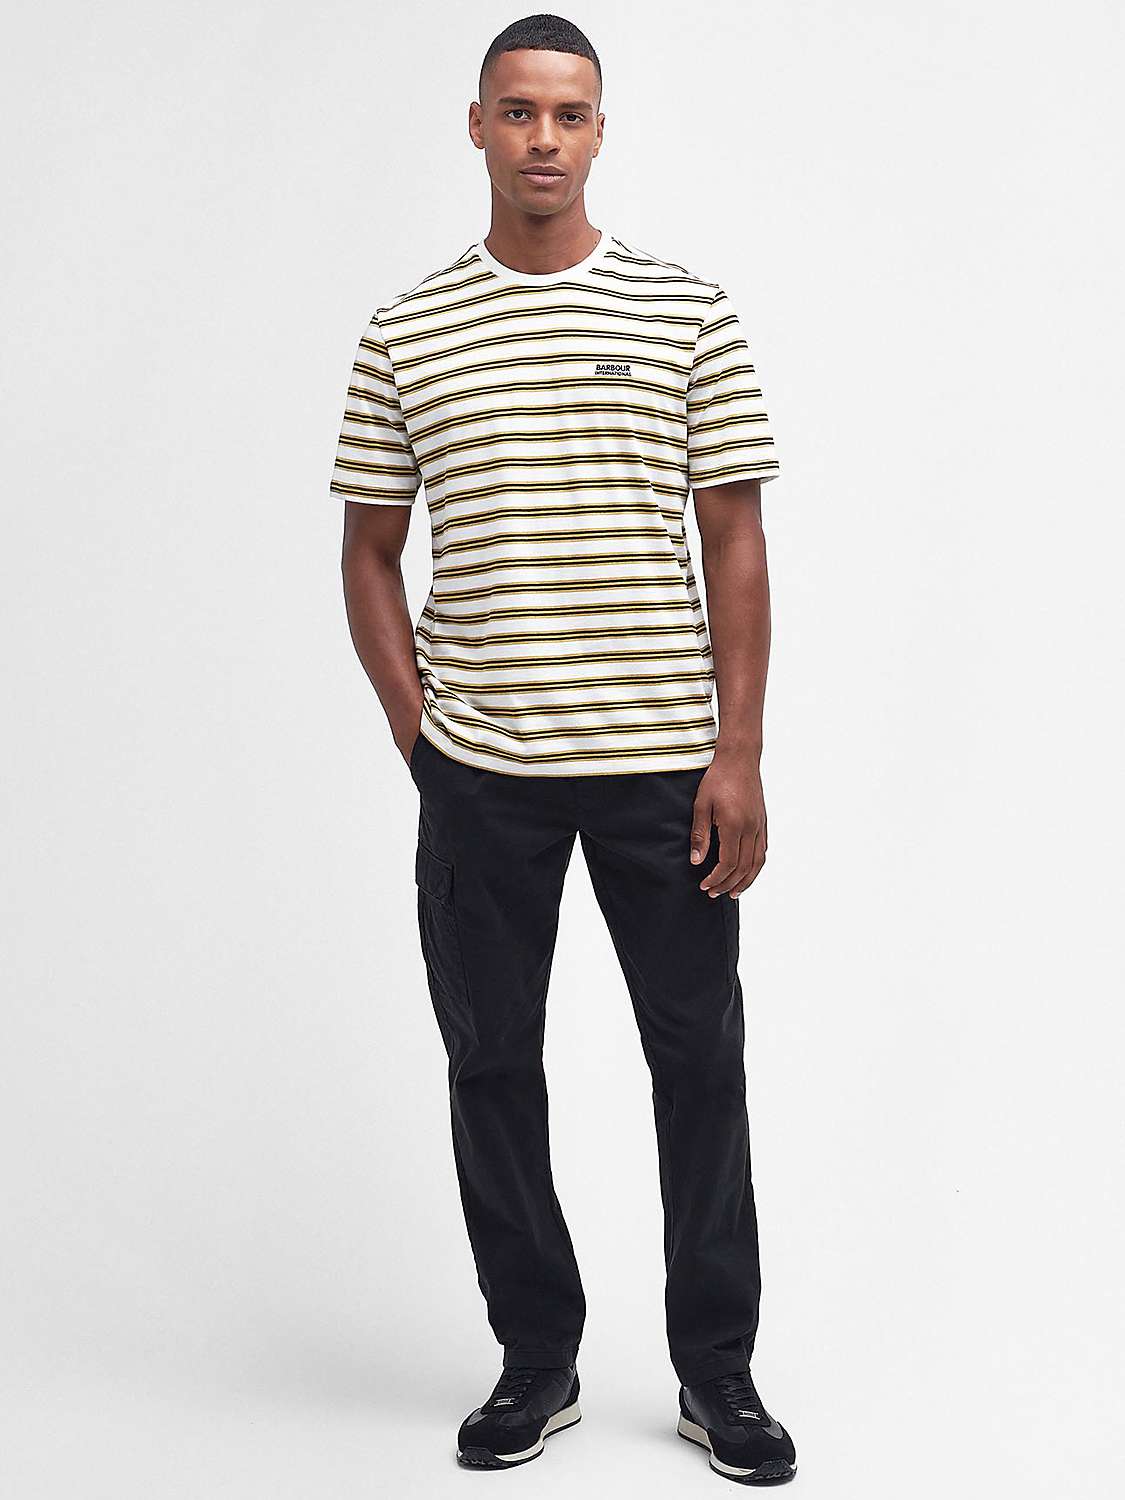 Buy Barbour International Cage T-Shirt, White/Multi Online at johnlewis.com